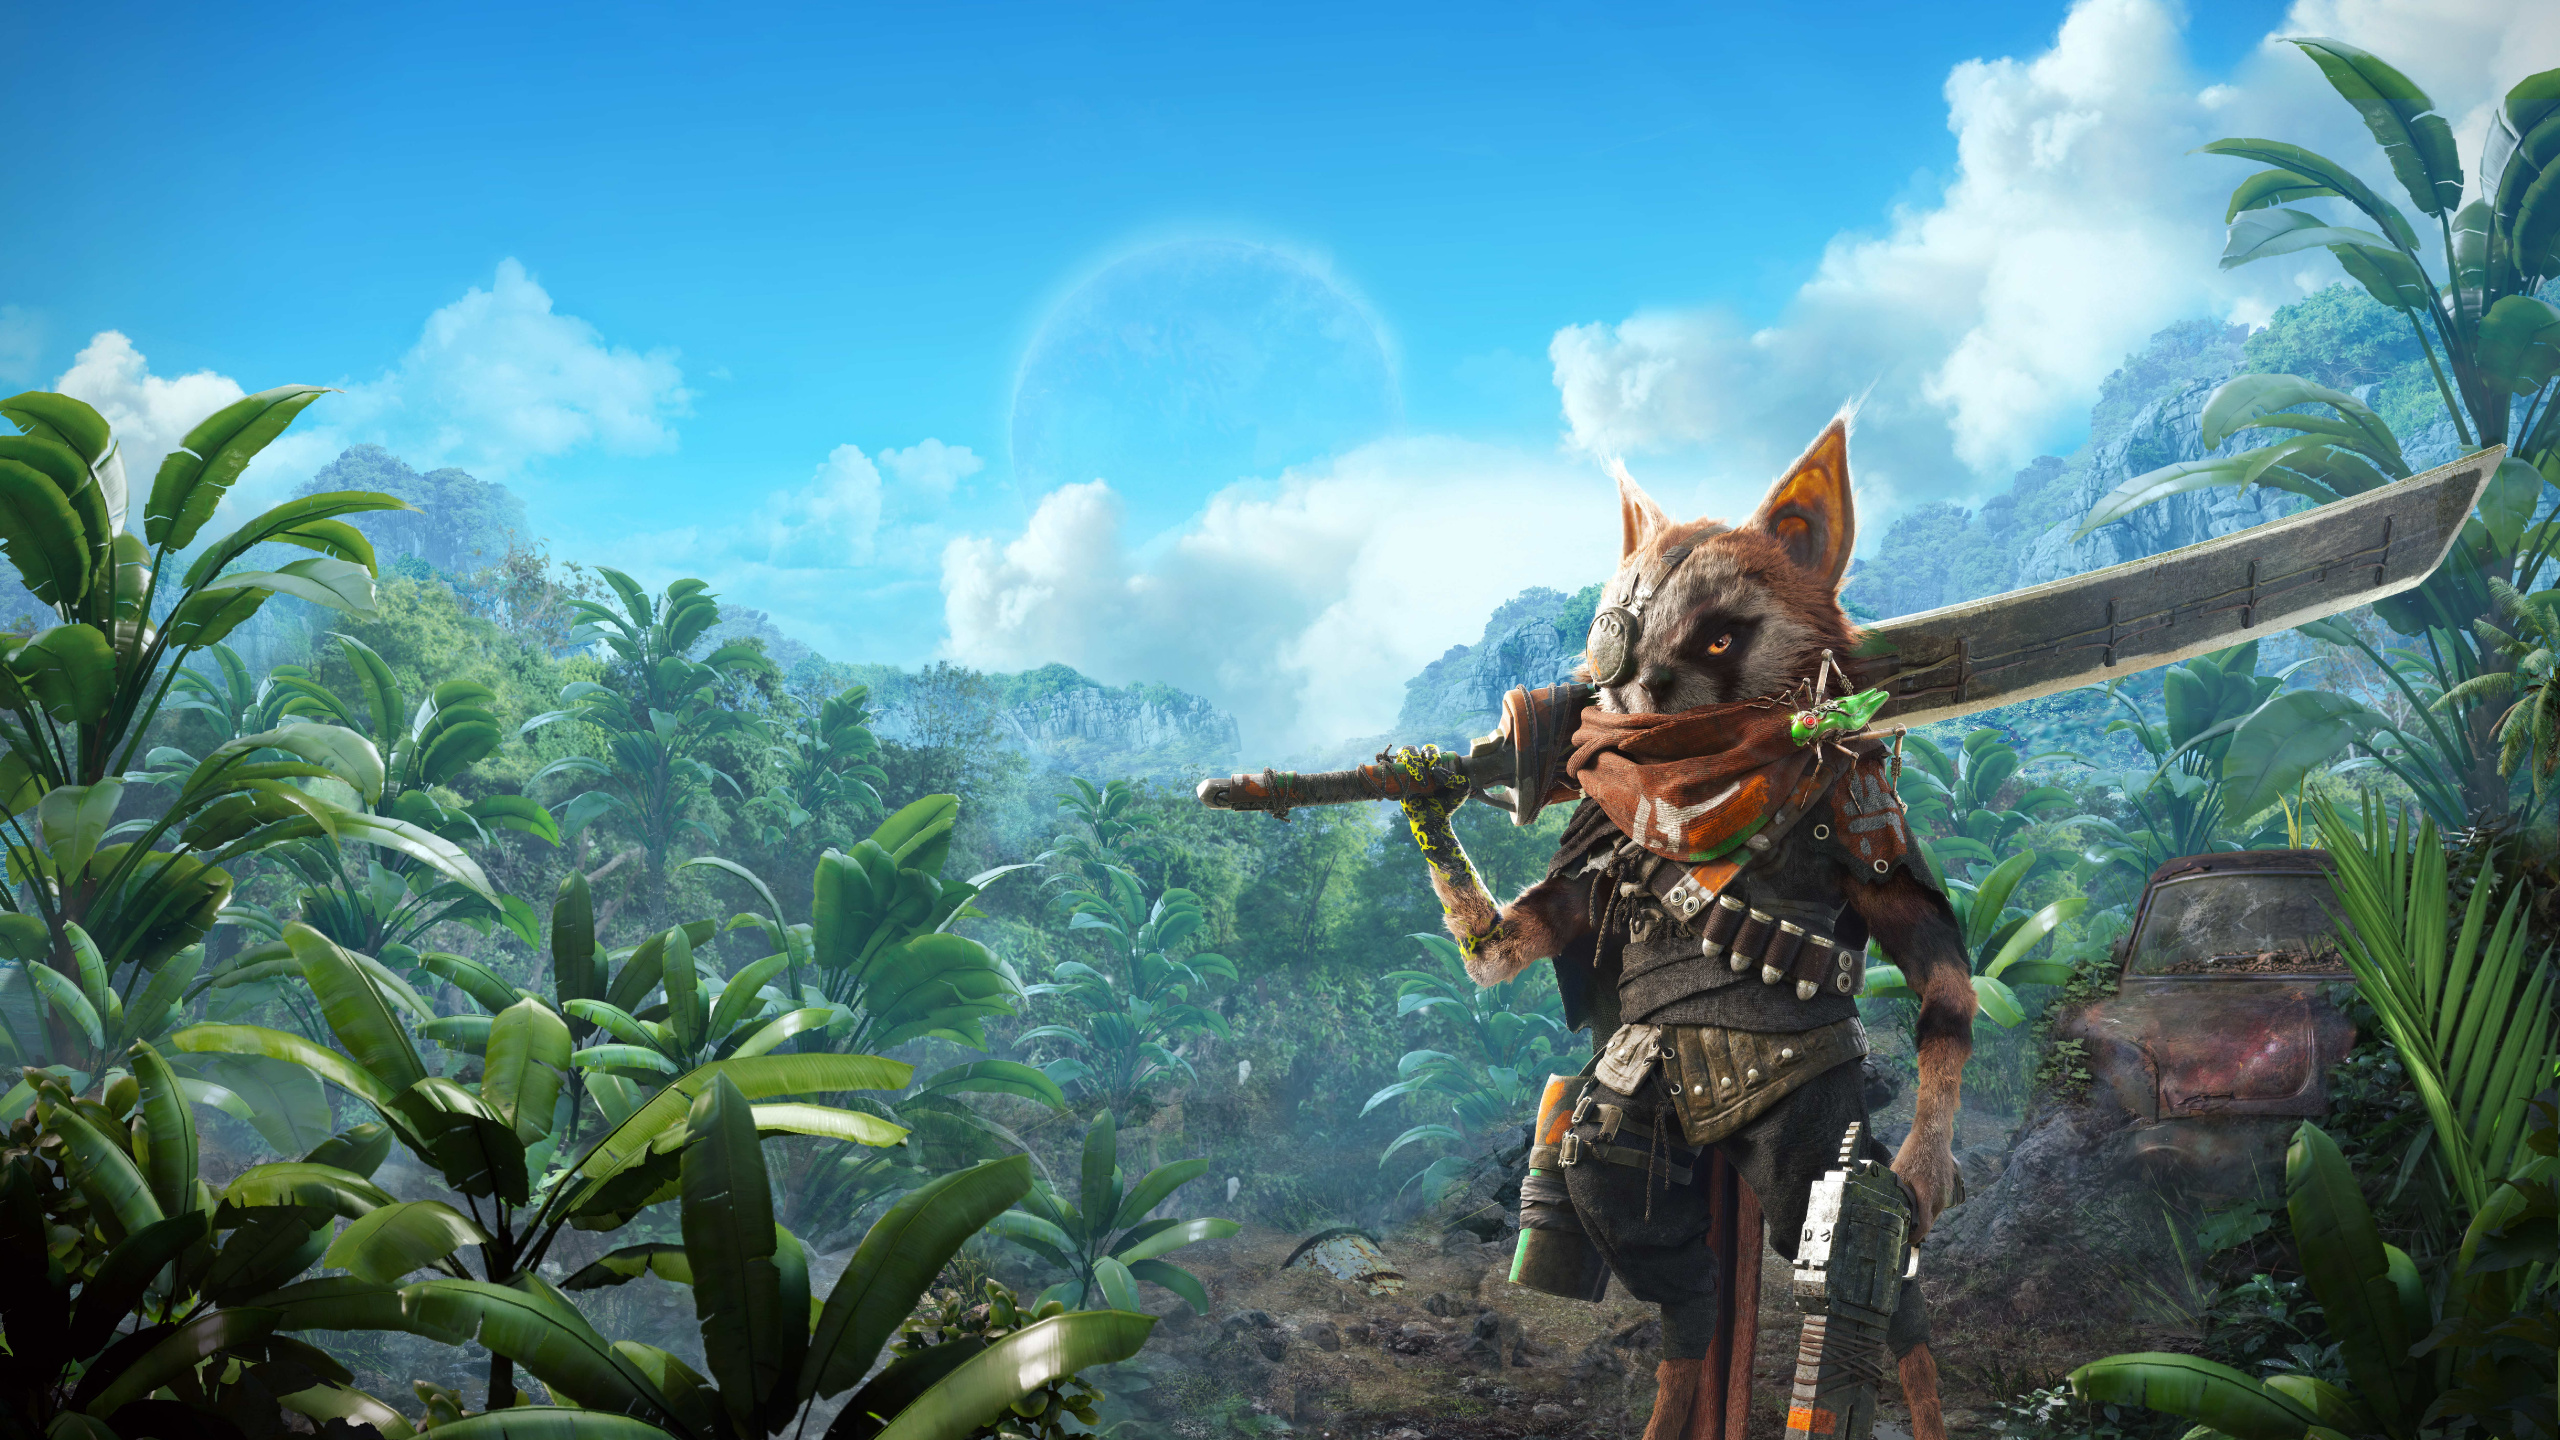 Biomutant, Xbox One, pc Game, Adventure Game, Jungle. Wallpaper in 2560x1440 Resolution